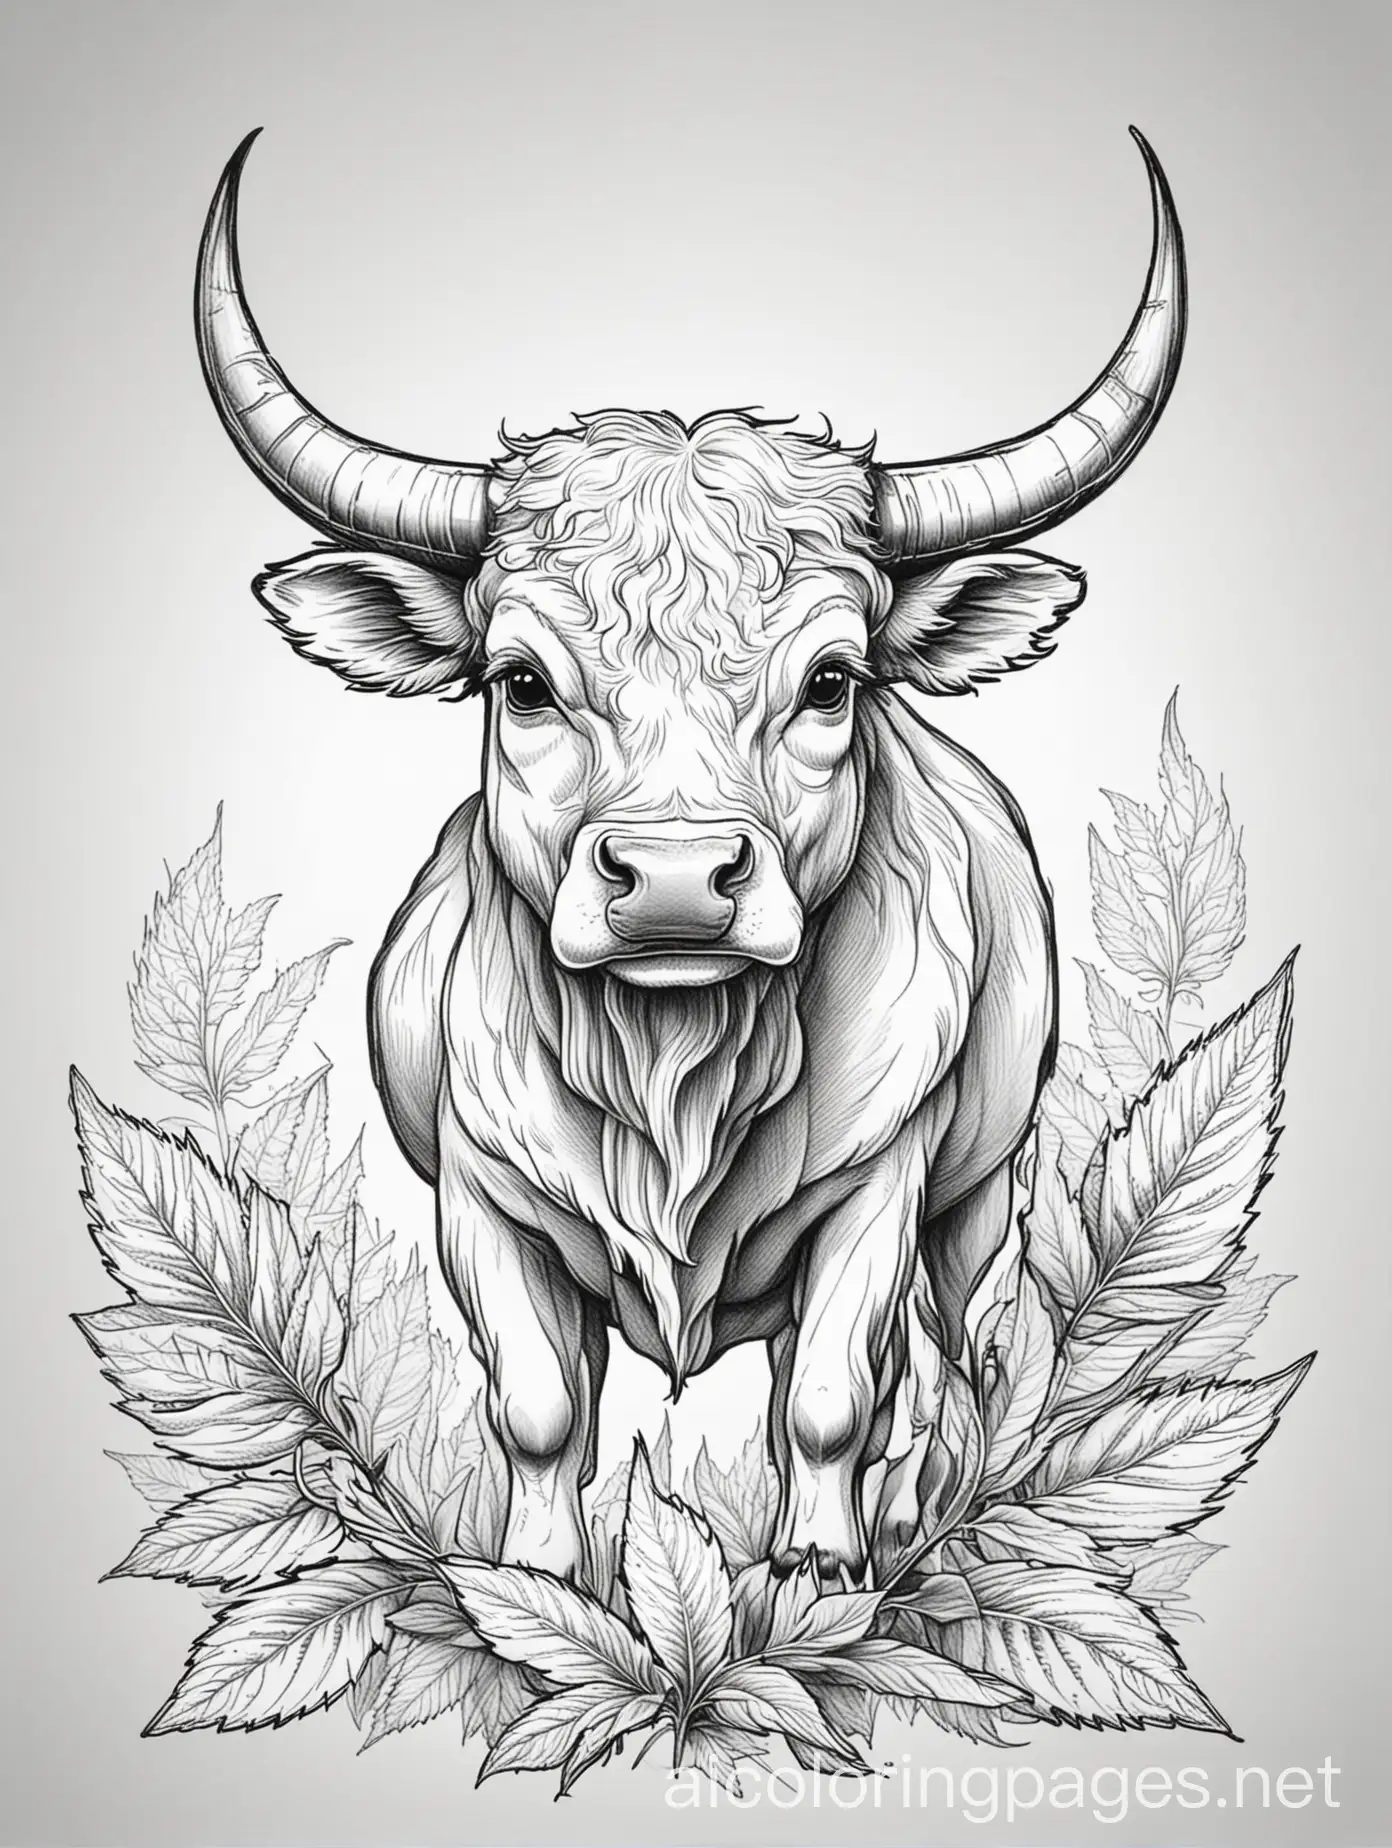 Fantasy-Bull-Cannabis-Coloring-Page-Simplistic-Black-and-White-Line-Art-on-White-Background